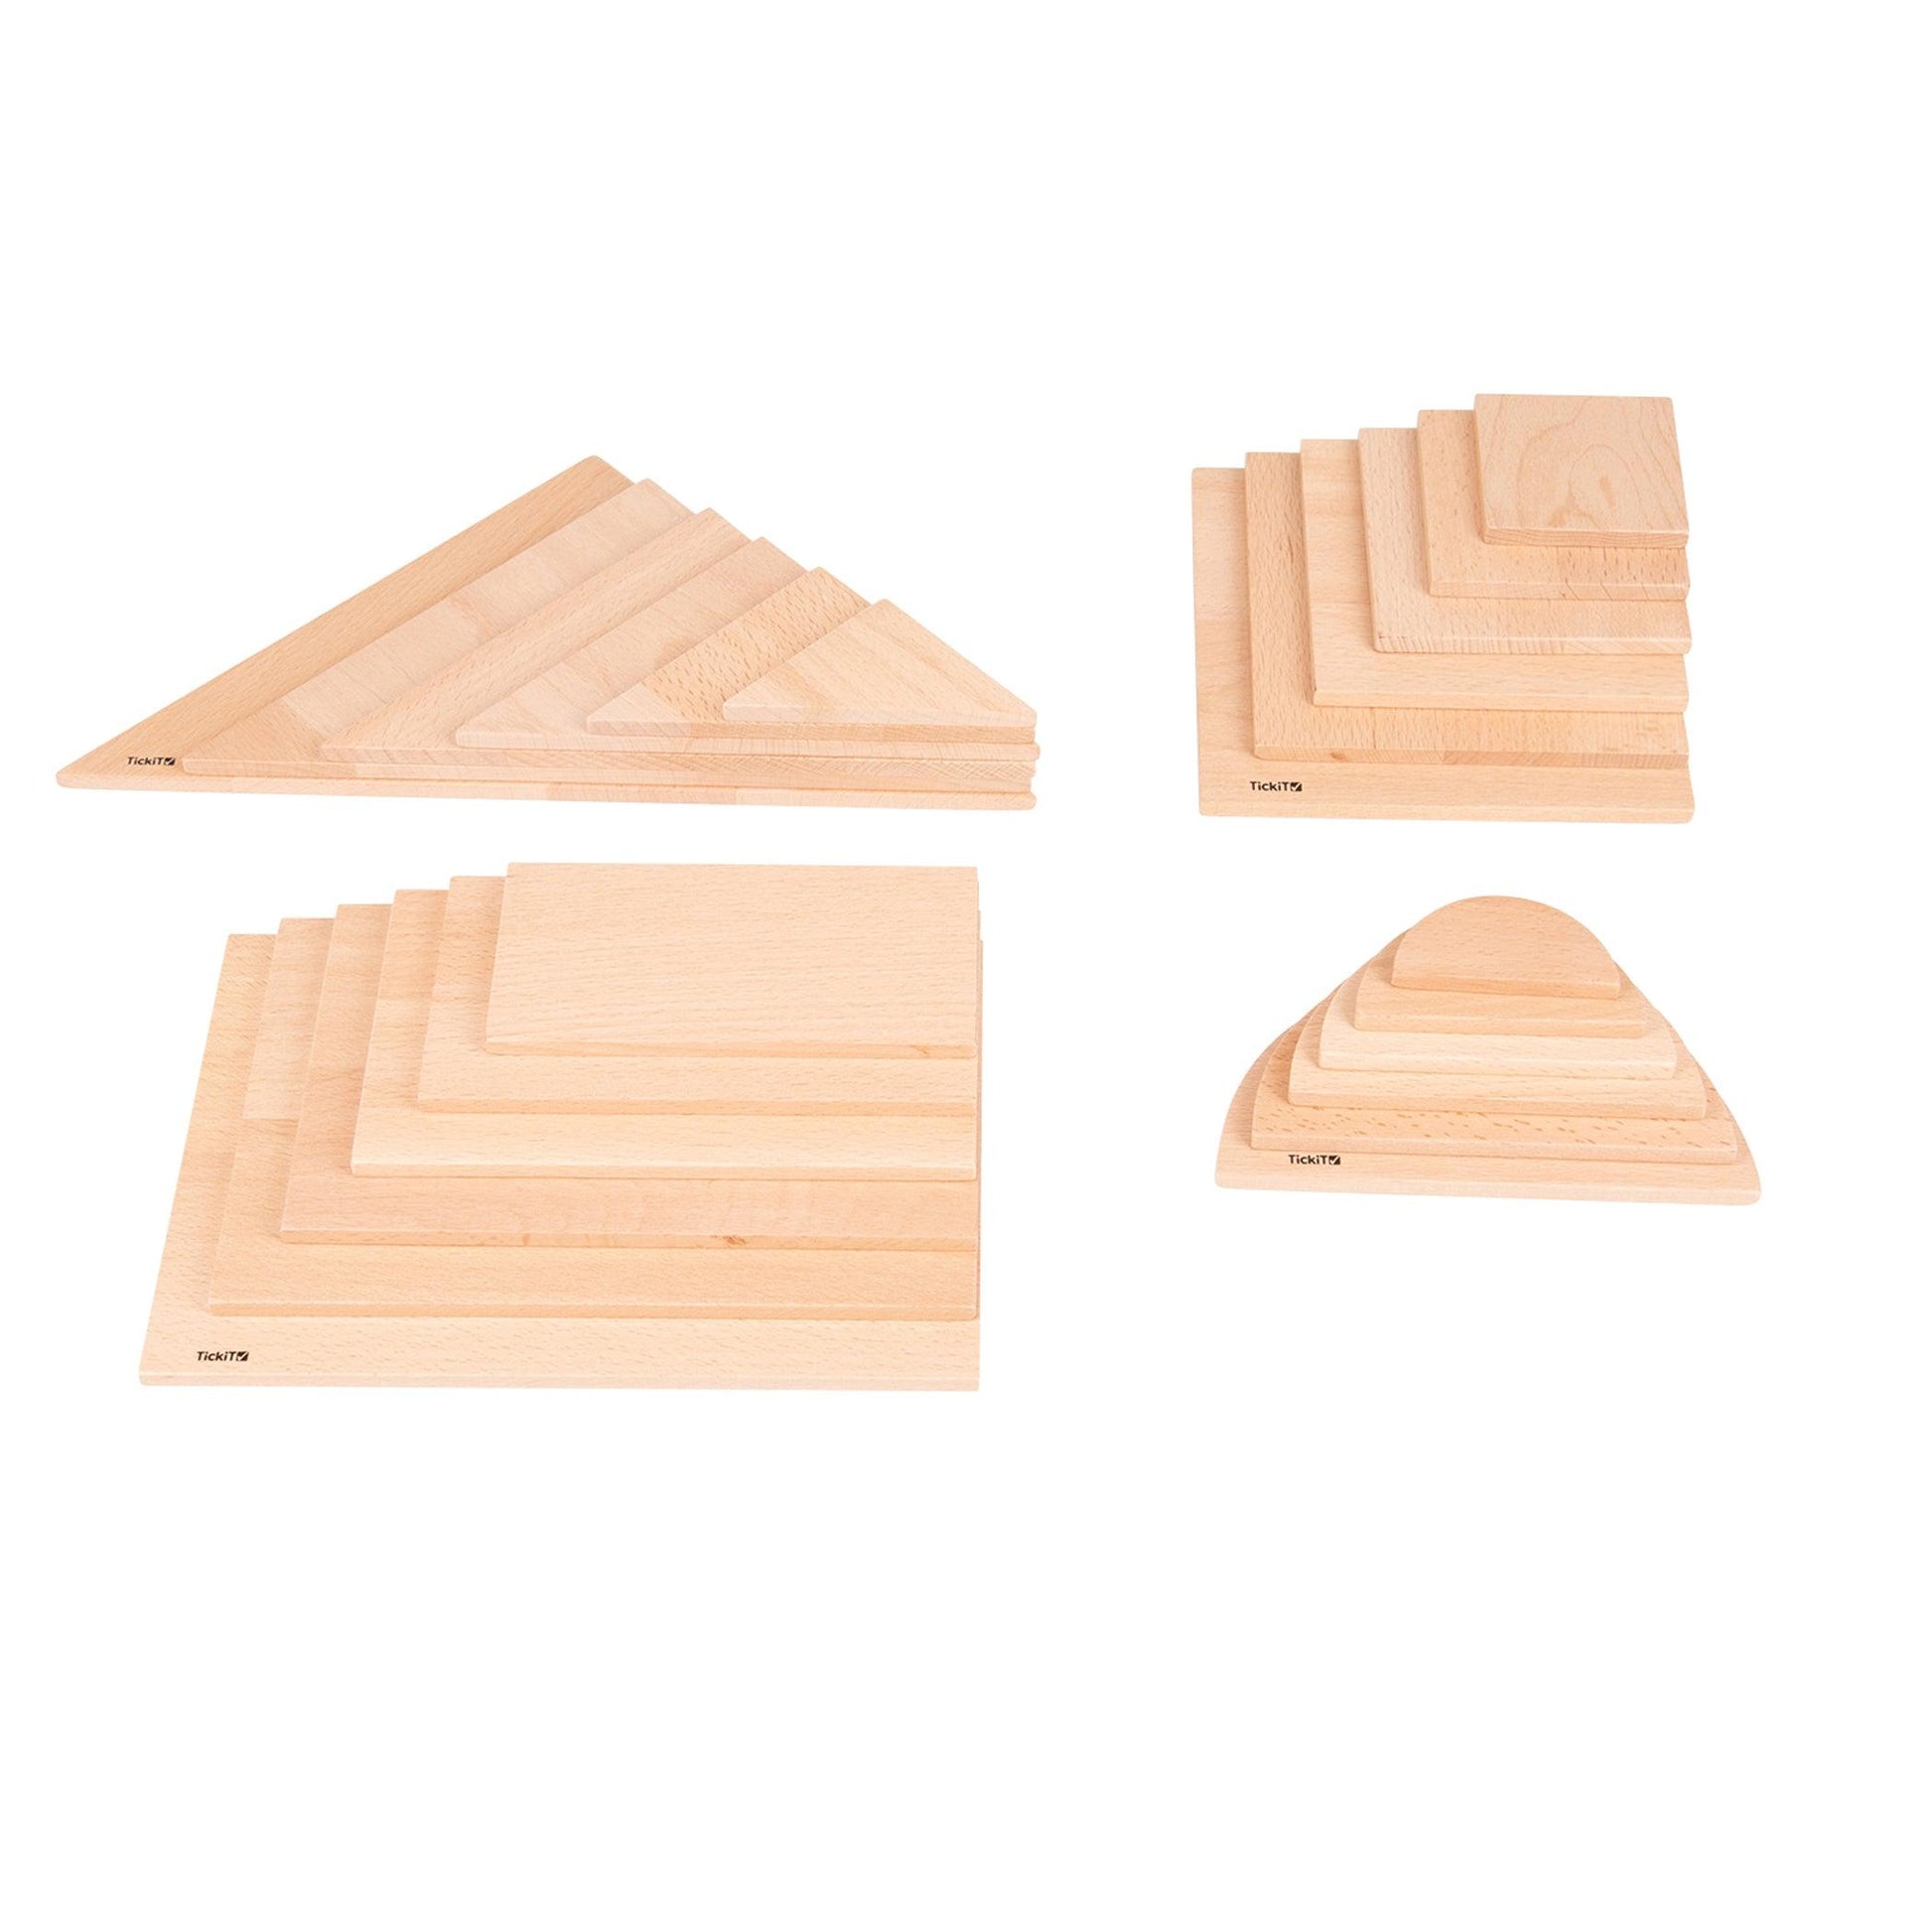 Natural Architect Panels - Complete Set - 24 Wood Panels - 4 Shapes in 6 Sizes - Loomini